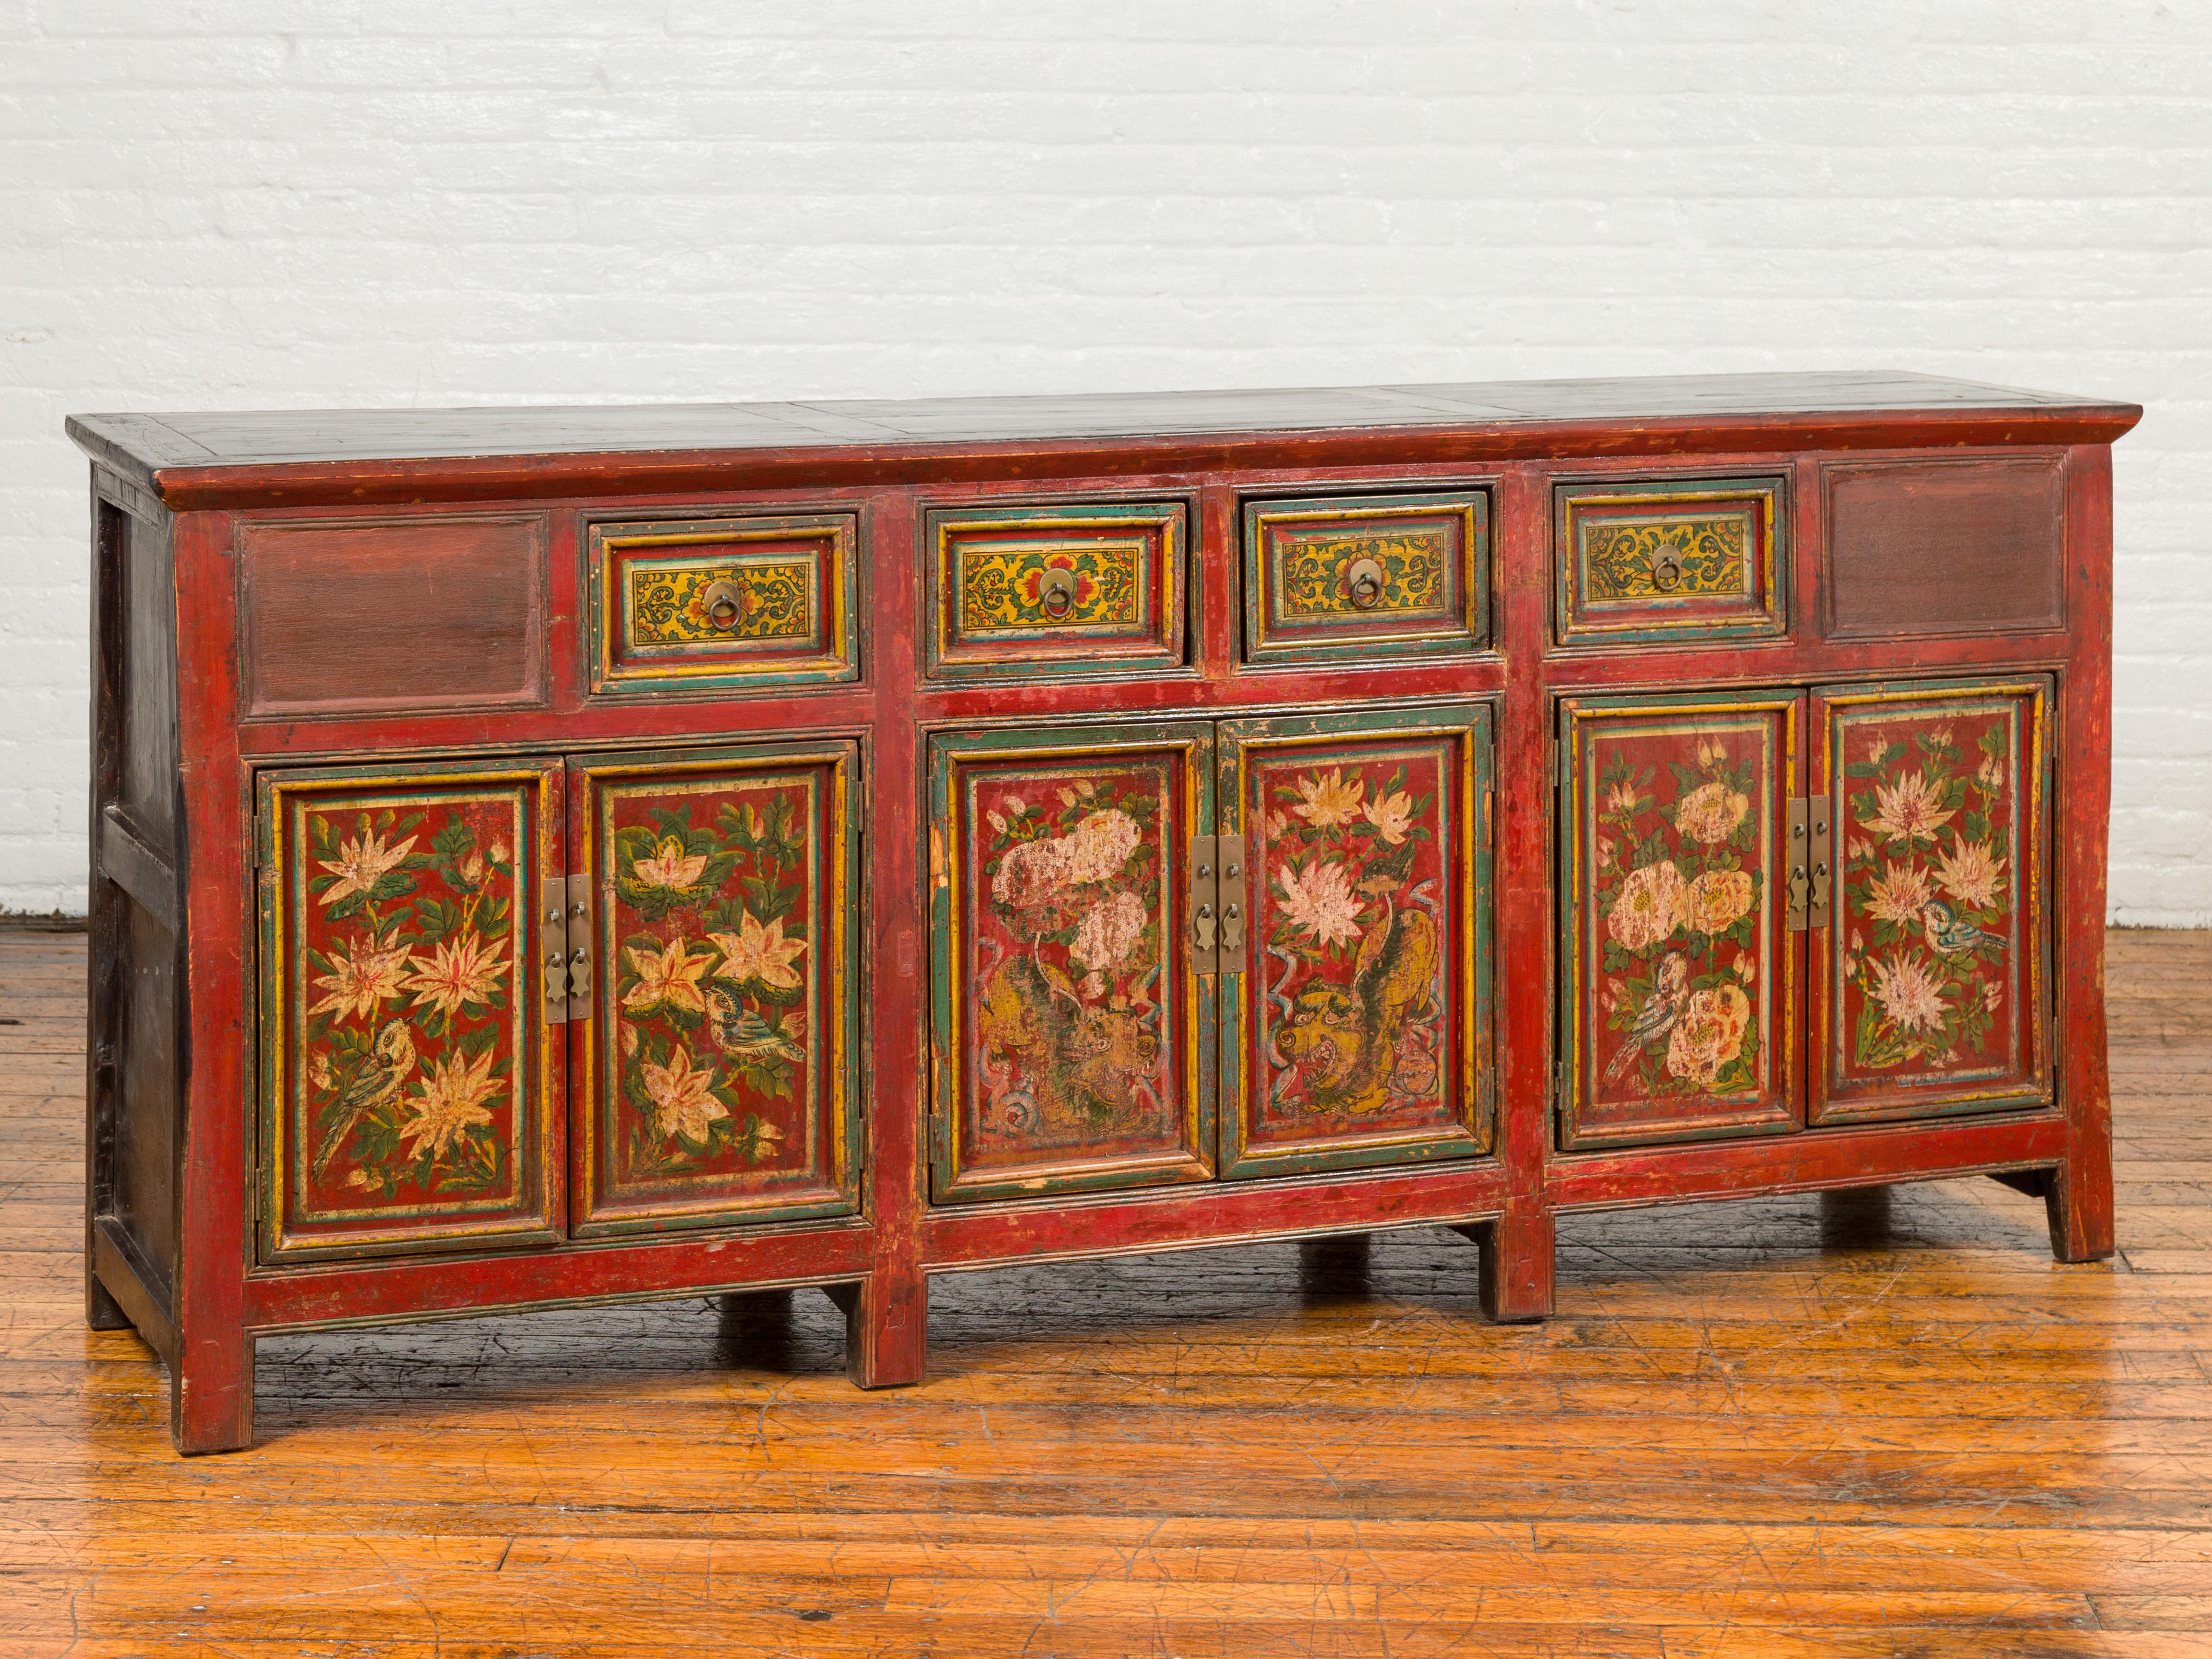 Wood Northern Chinese 19th Century Red Lacquered Buffet with Painted Floral Decor